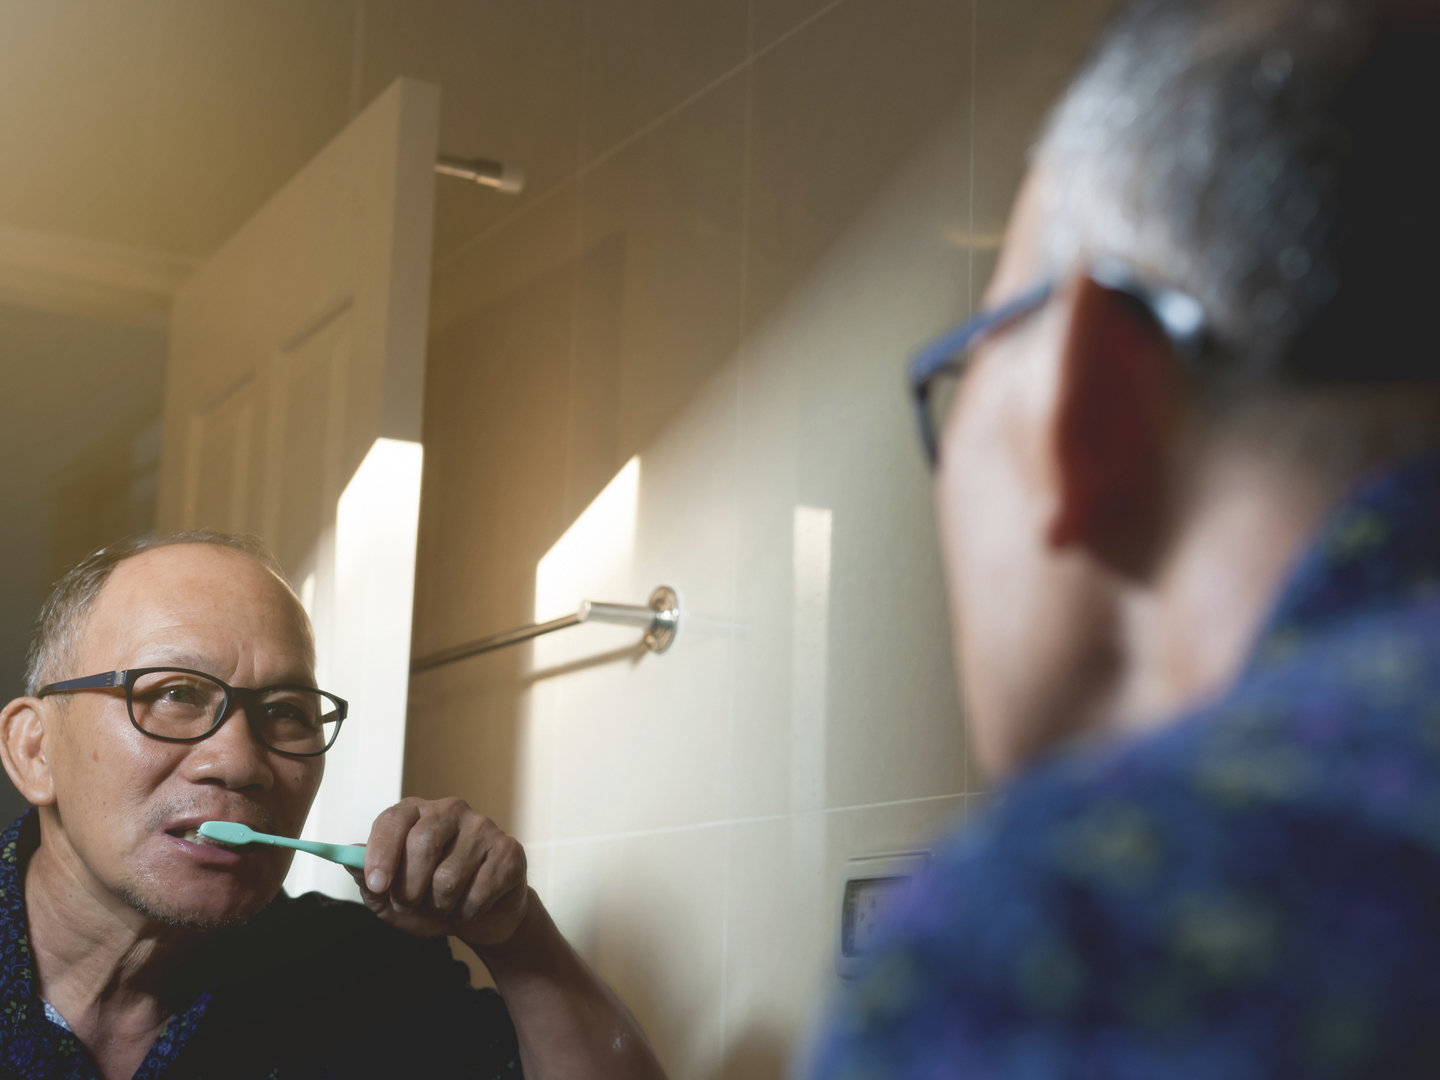 Asian oldman is Brushing Teeth and looking through the mirror in the bathroom.